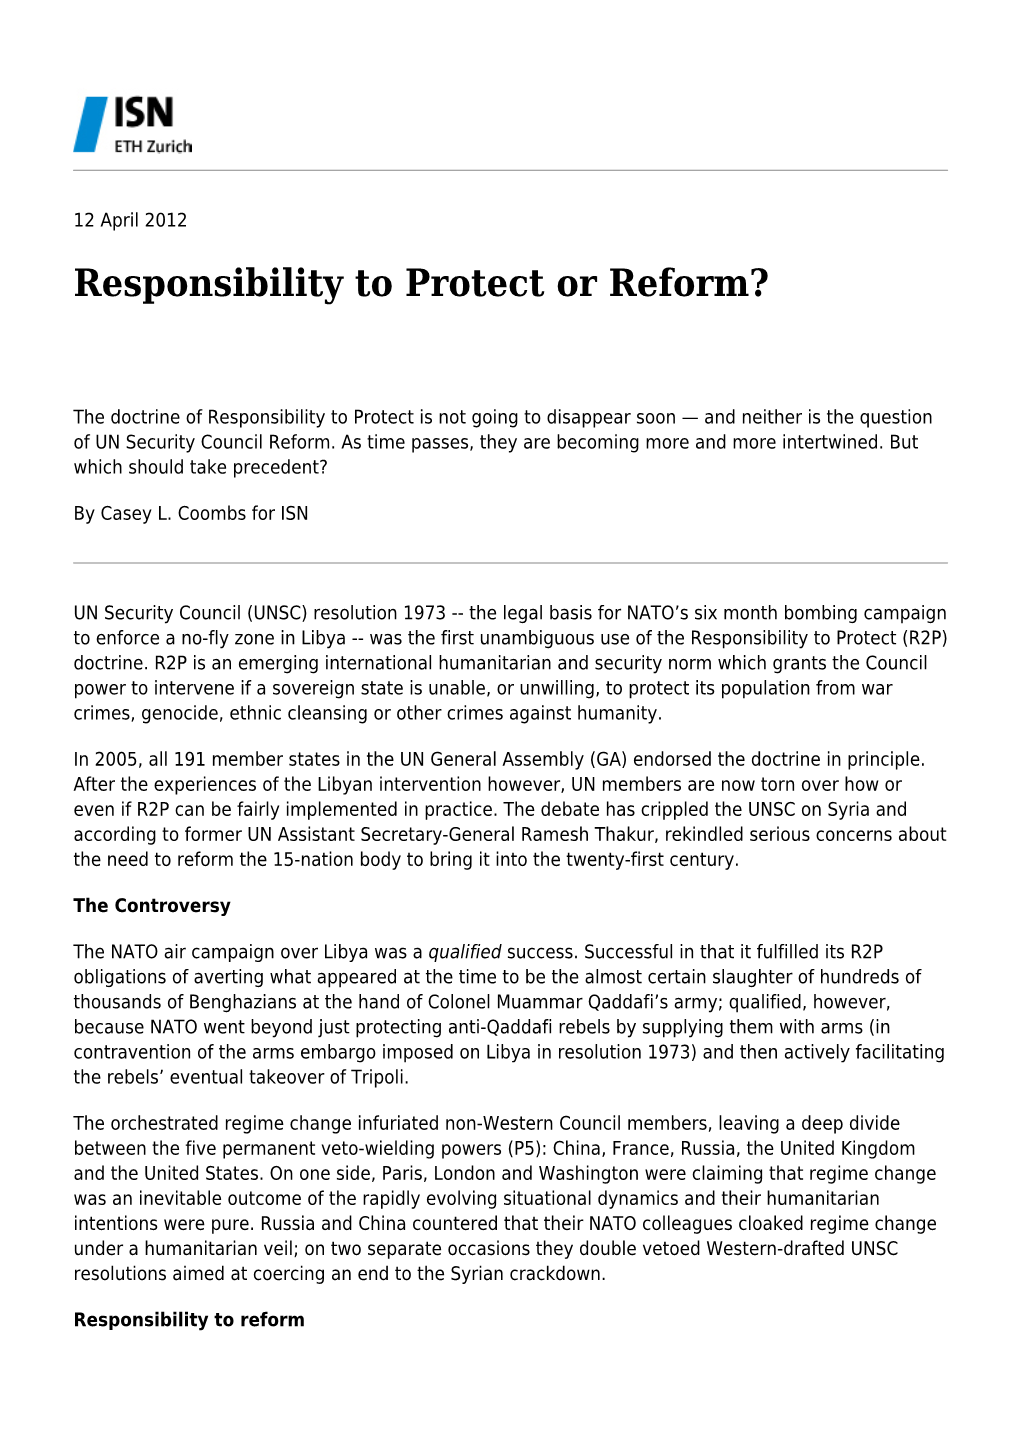 Responsibility to Protect Or Reform?